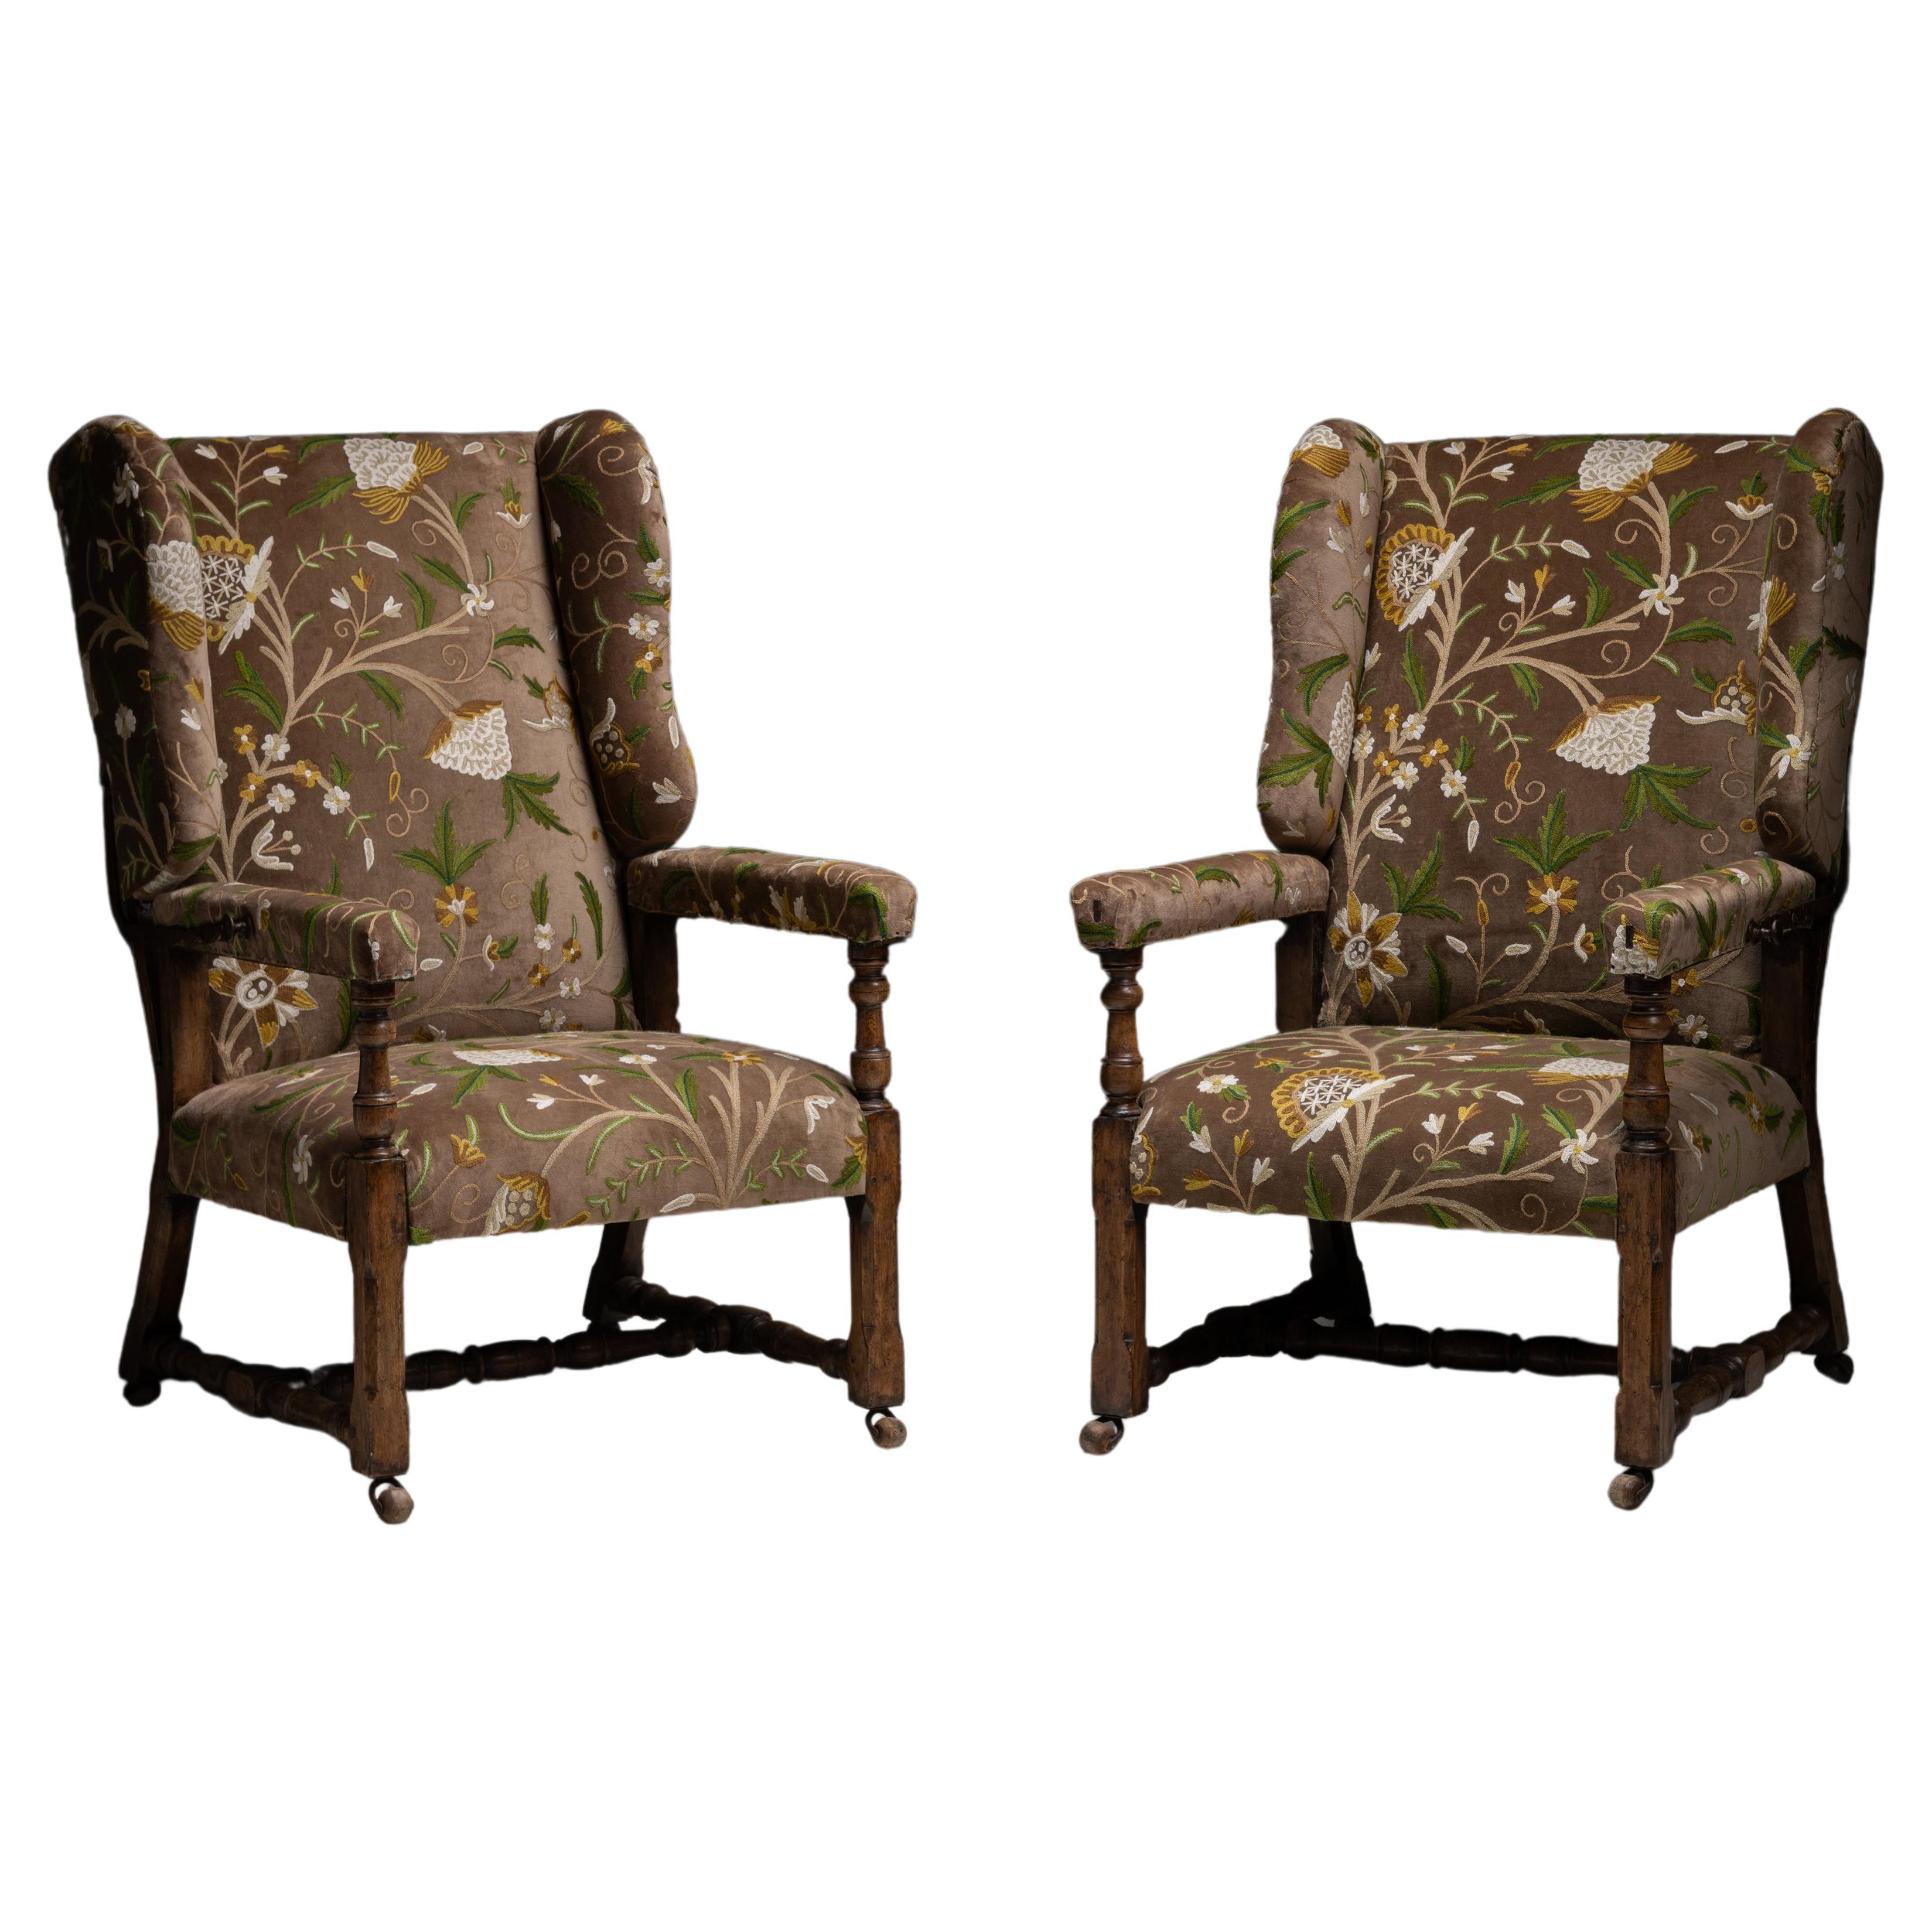 Reclining Wing Chairs in Crewel Velvet, France circa 1880 For Sale